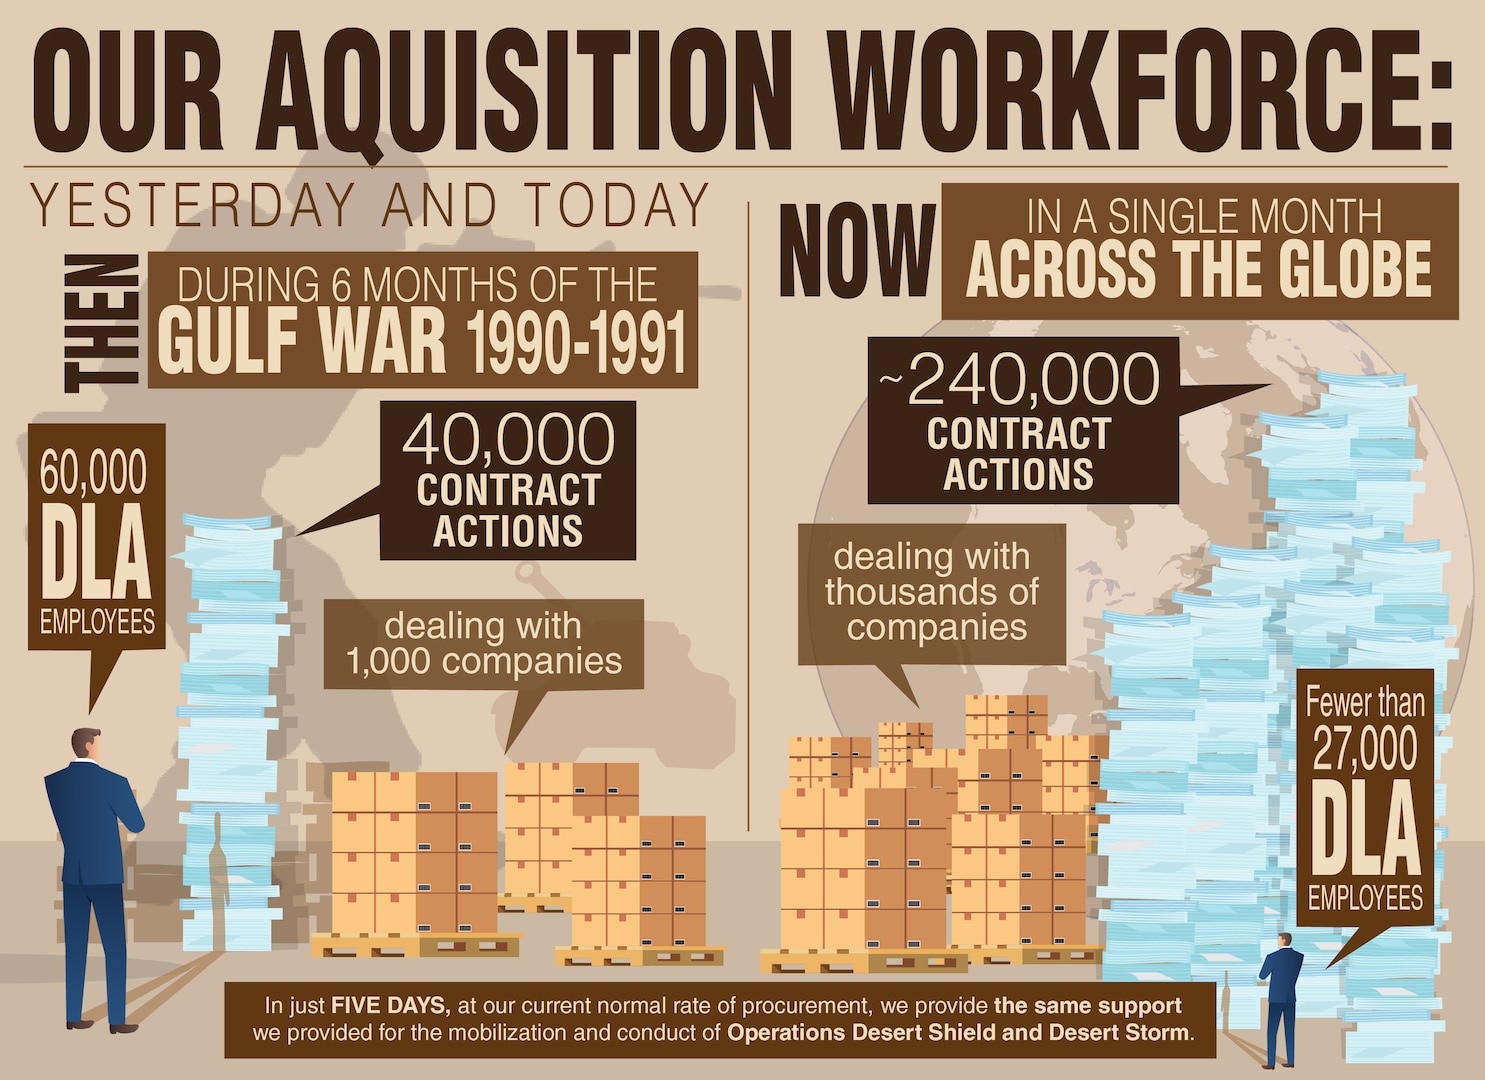 An infographic depicting the difference in the work of DLA Acquisition comparing 6 months of contract actions in 1990 against an individual month in 2021, amounting to an average eightfold increase.